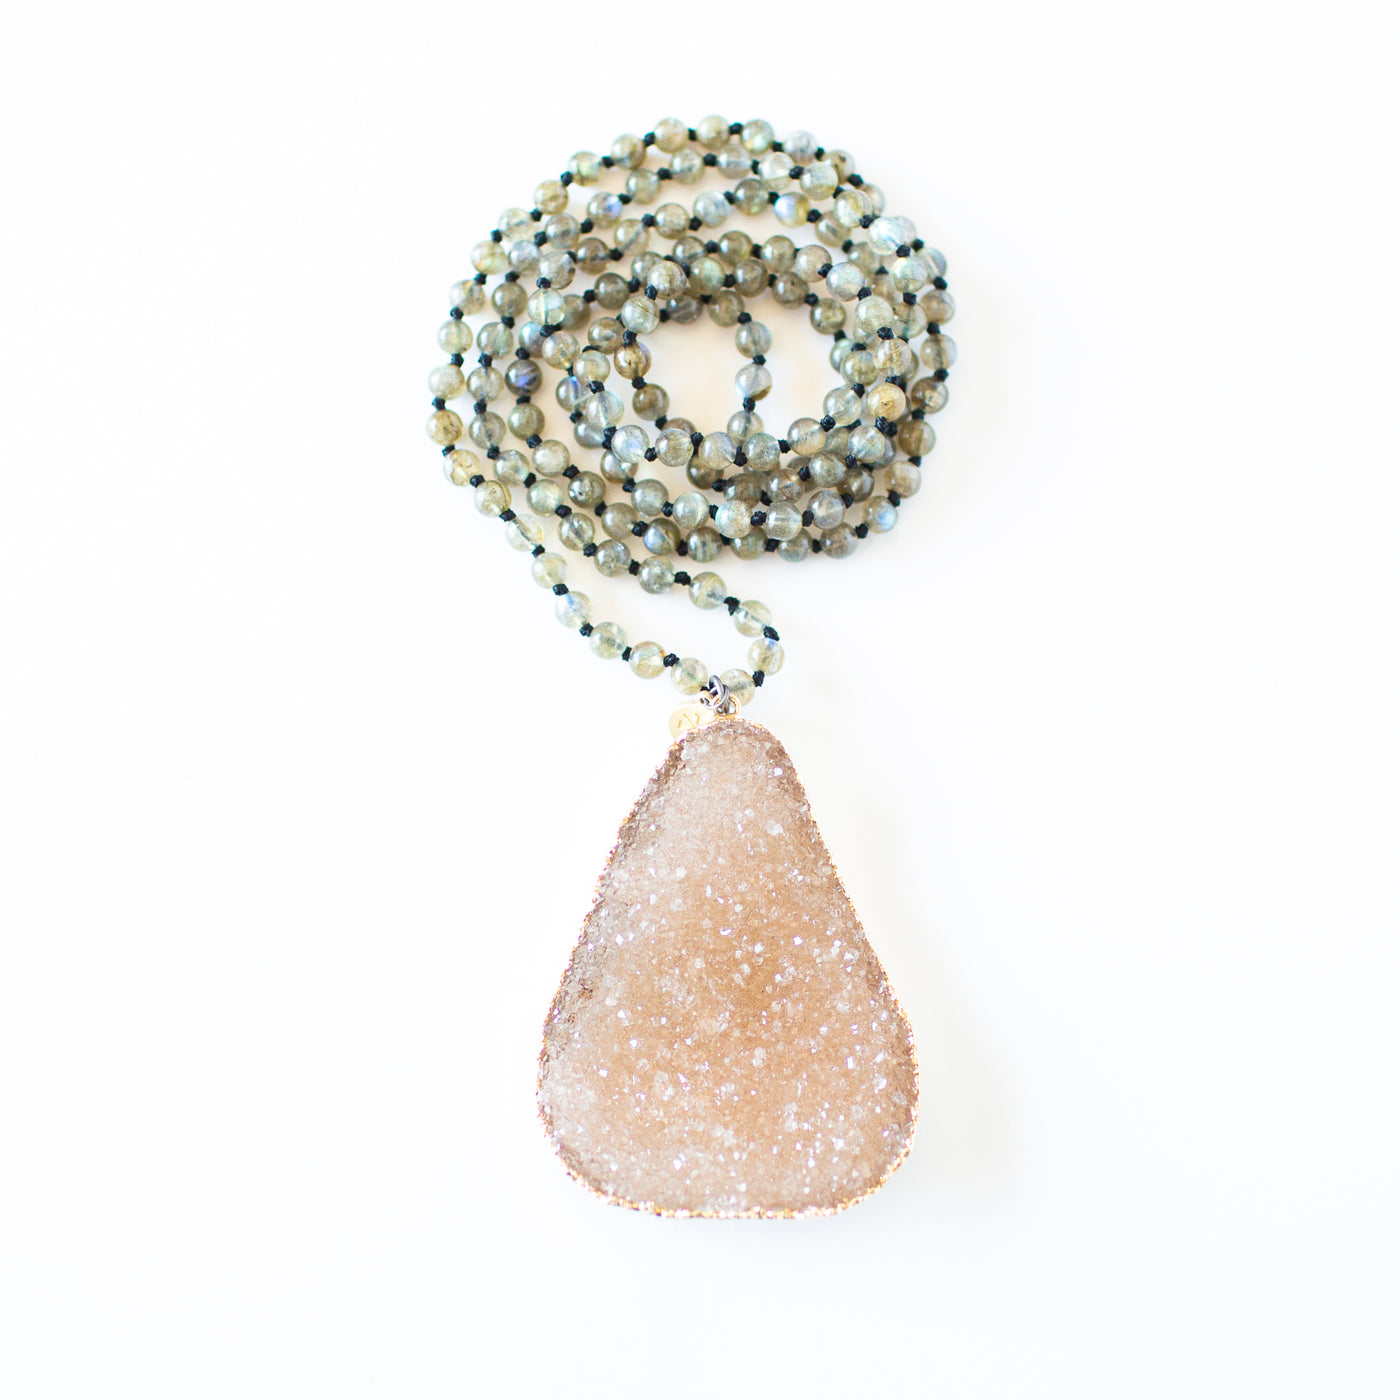 Druzy Quartz Pendant Necklace by Karli Buxton - Corinne an Affordable Women's Clothing Boutique in the US USA